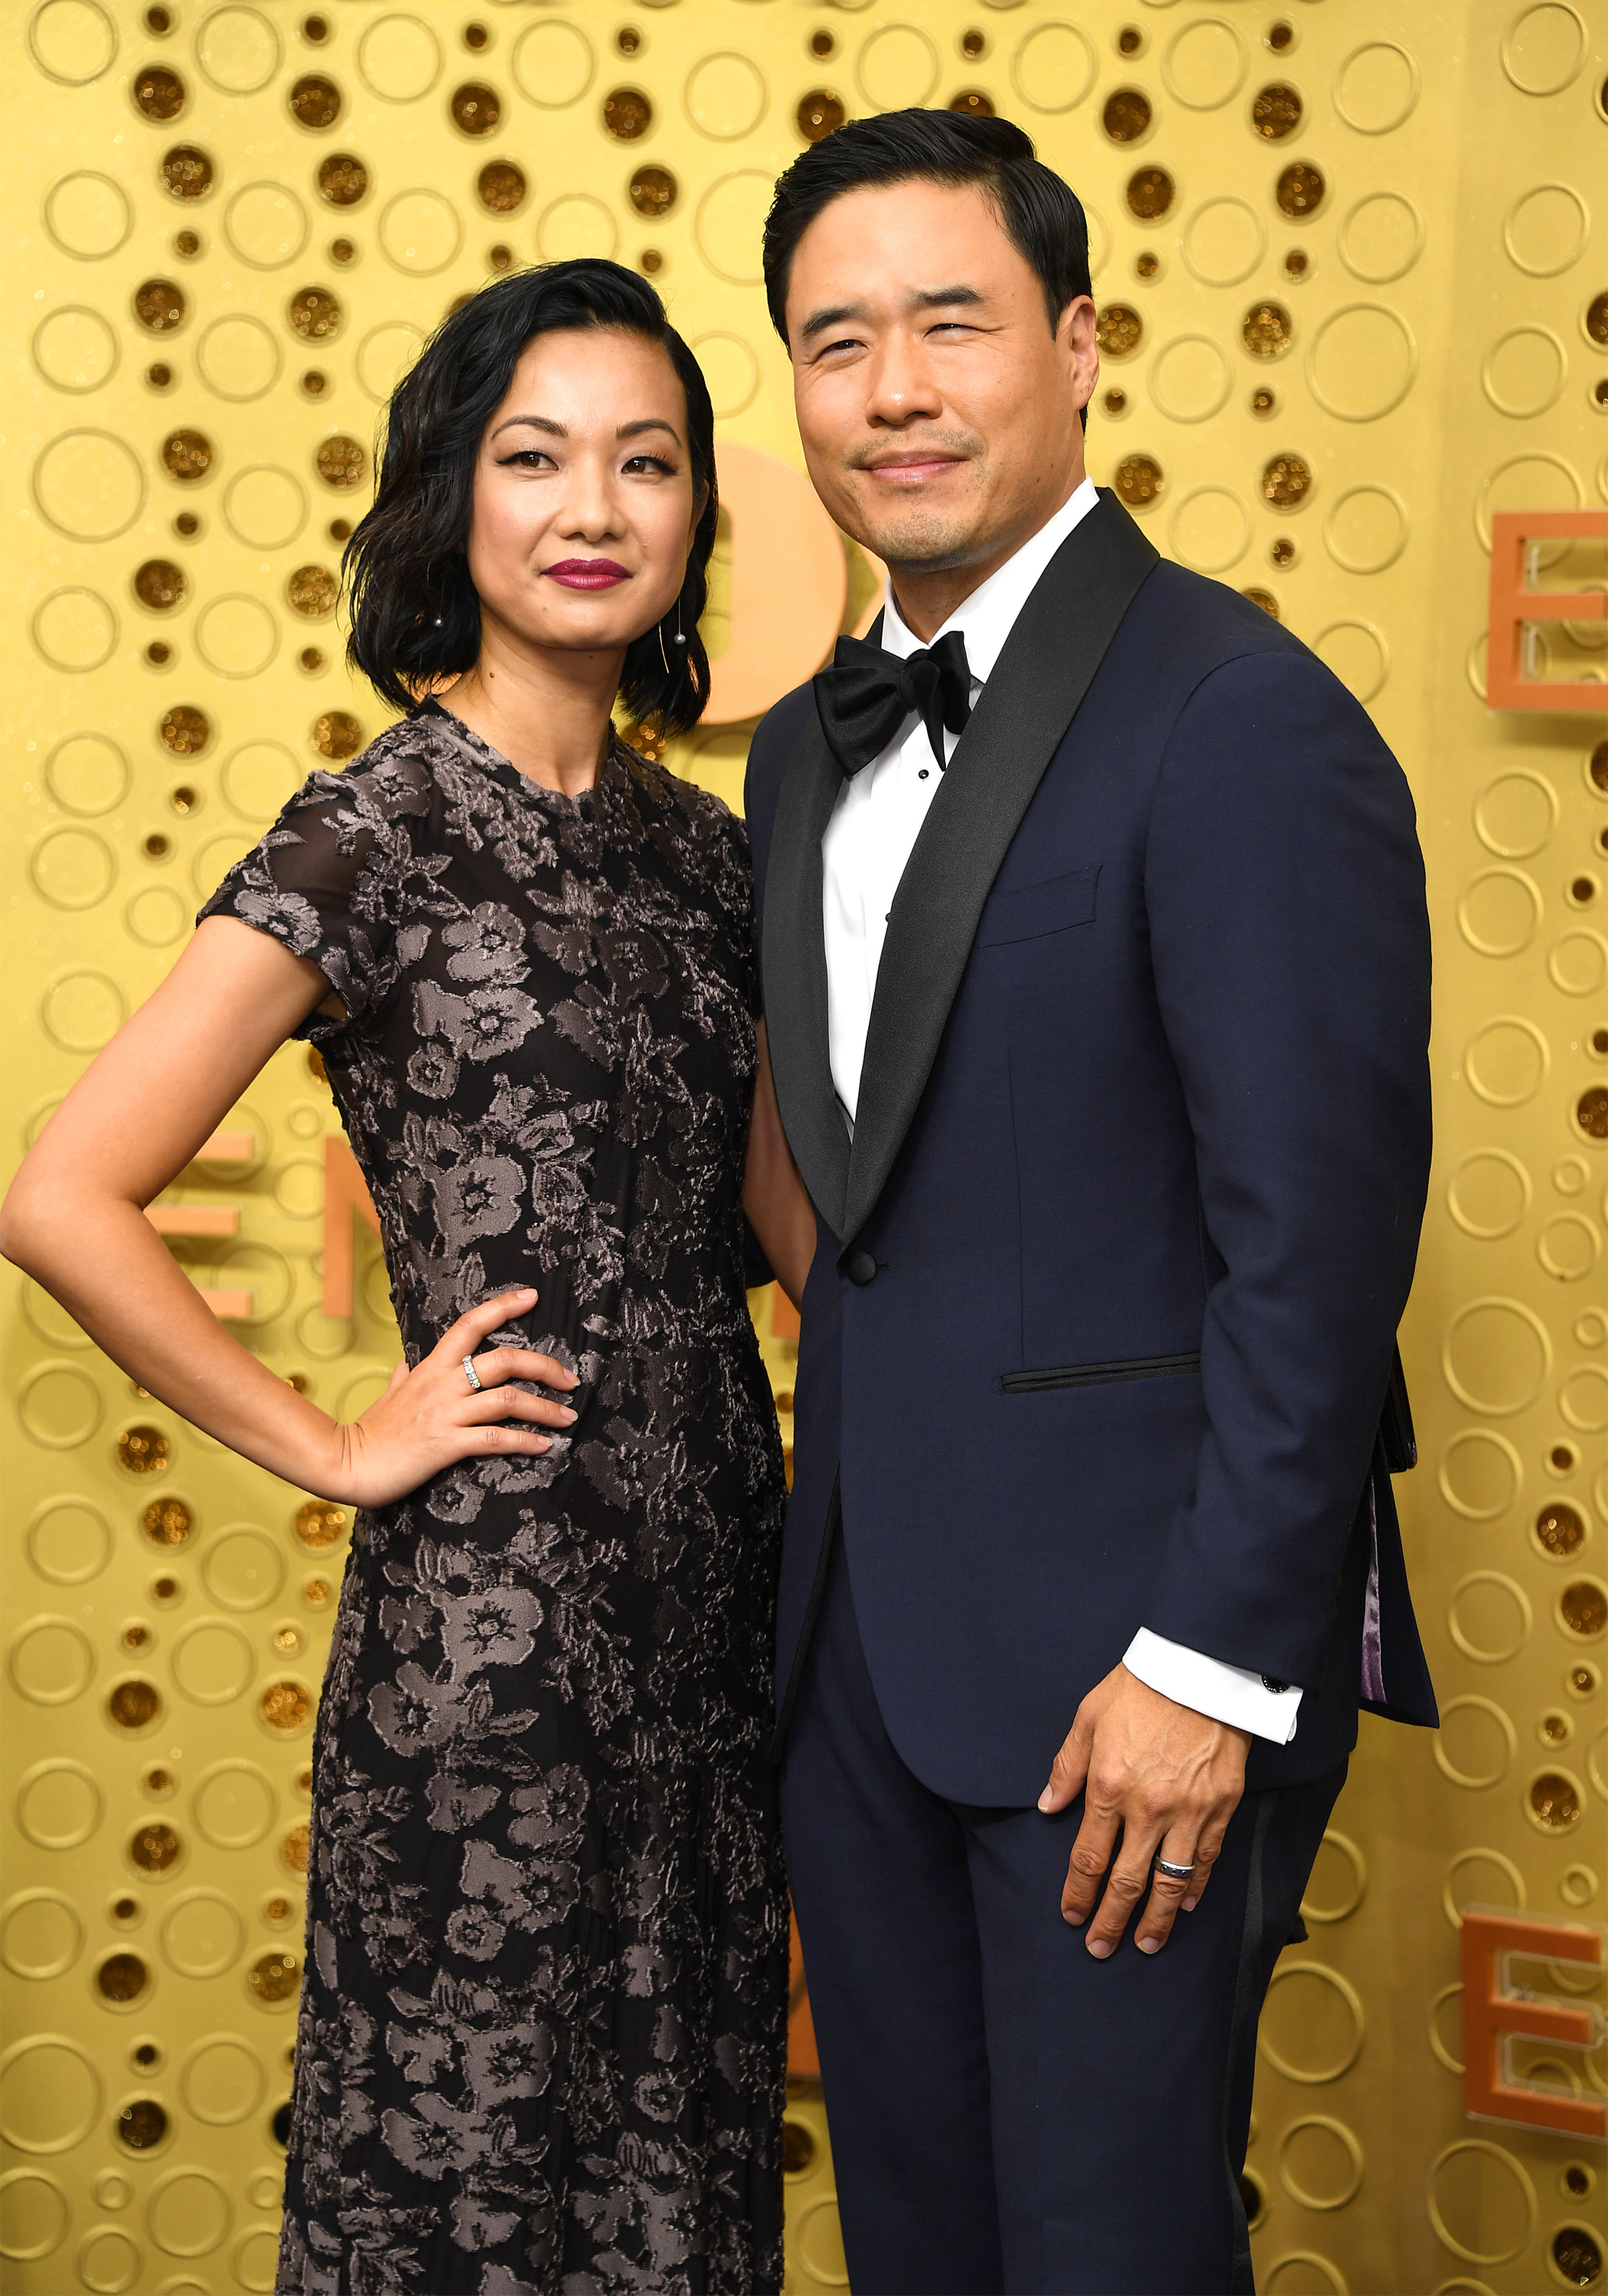 Jae Suh Park and Randall Park attend the 71st Emmy Awards at Microsoft Theater on September 22, 2019, in Los Angeles, California. | Source: Getty Images